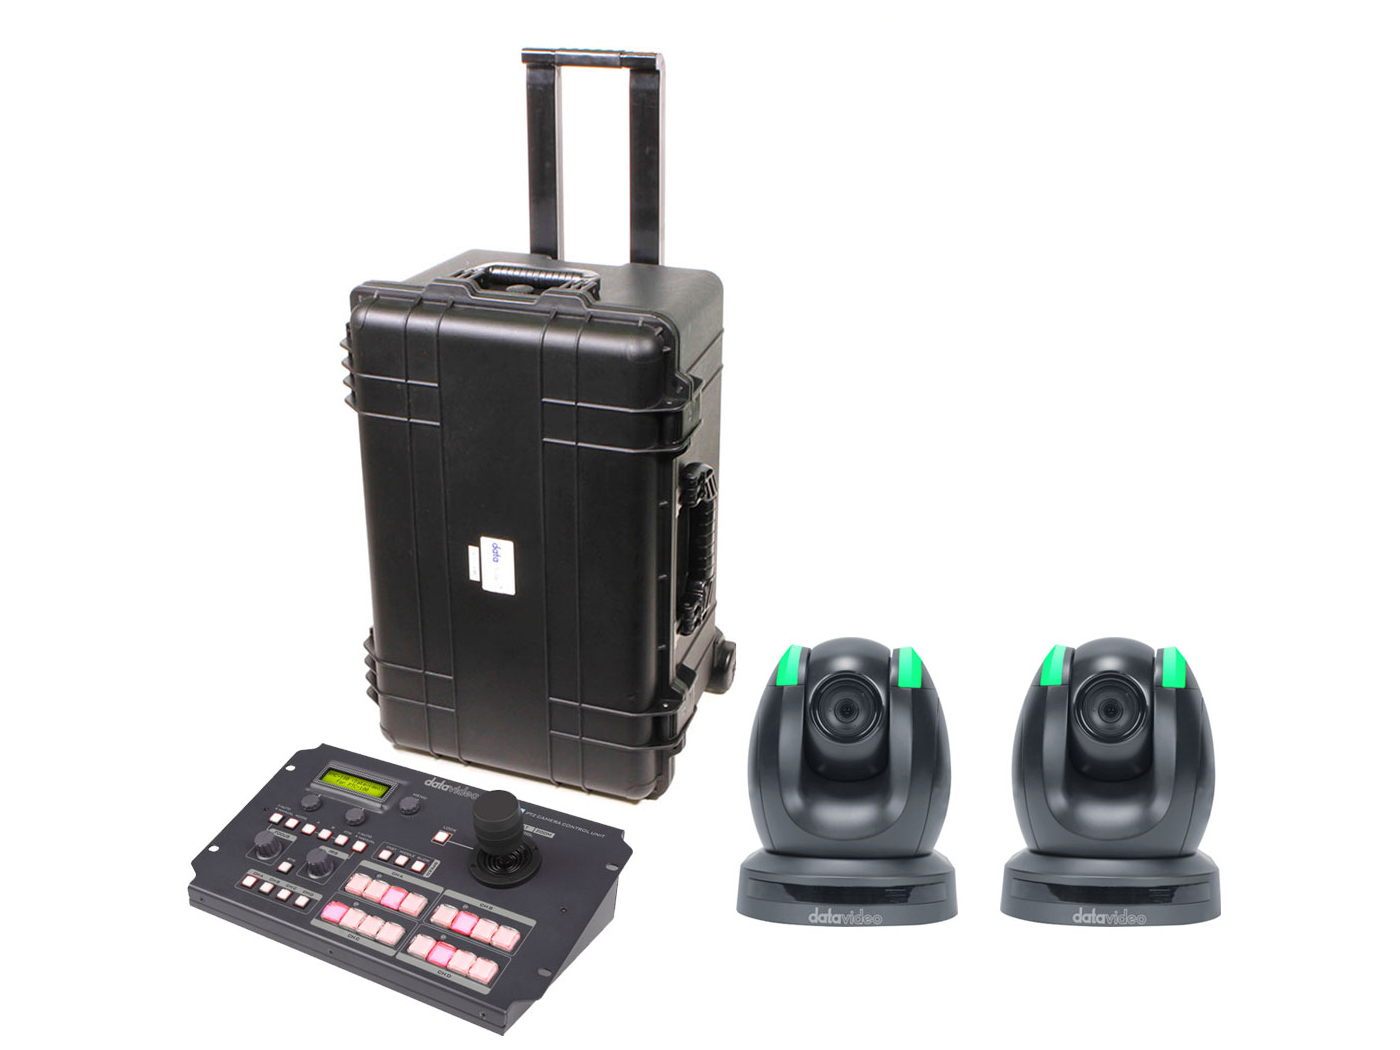 GO-2CAM 2 remote camera kit with controller/cables and hand-carry case by Datavideo